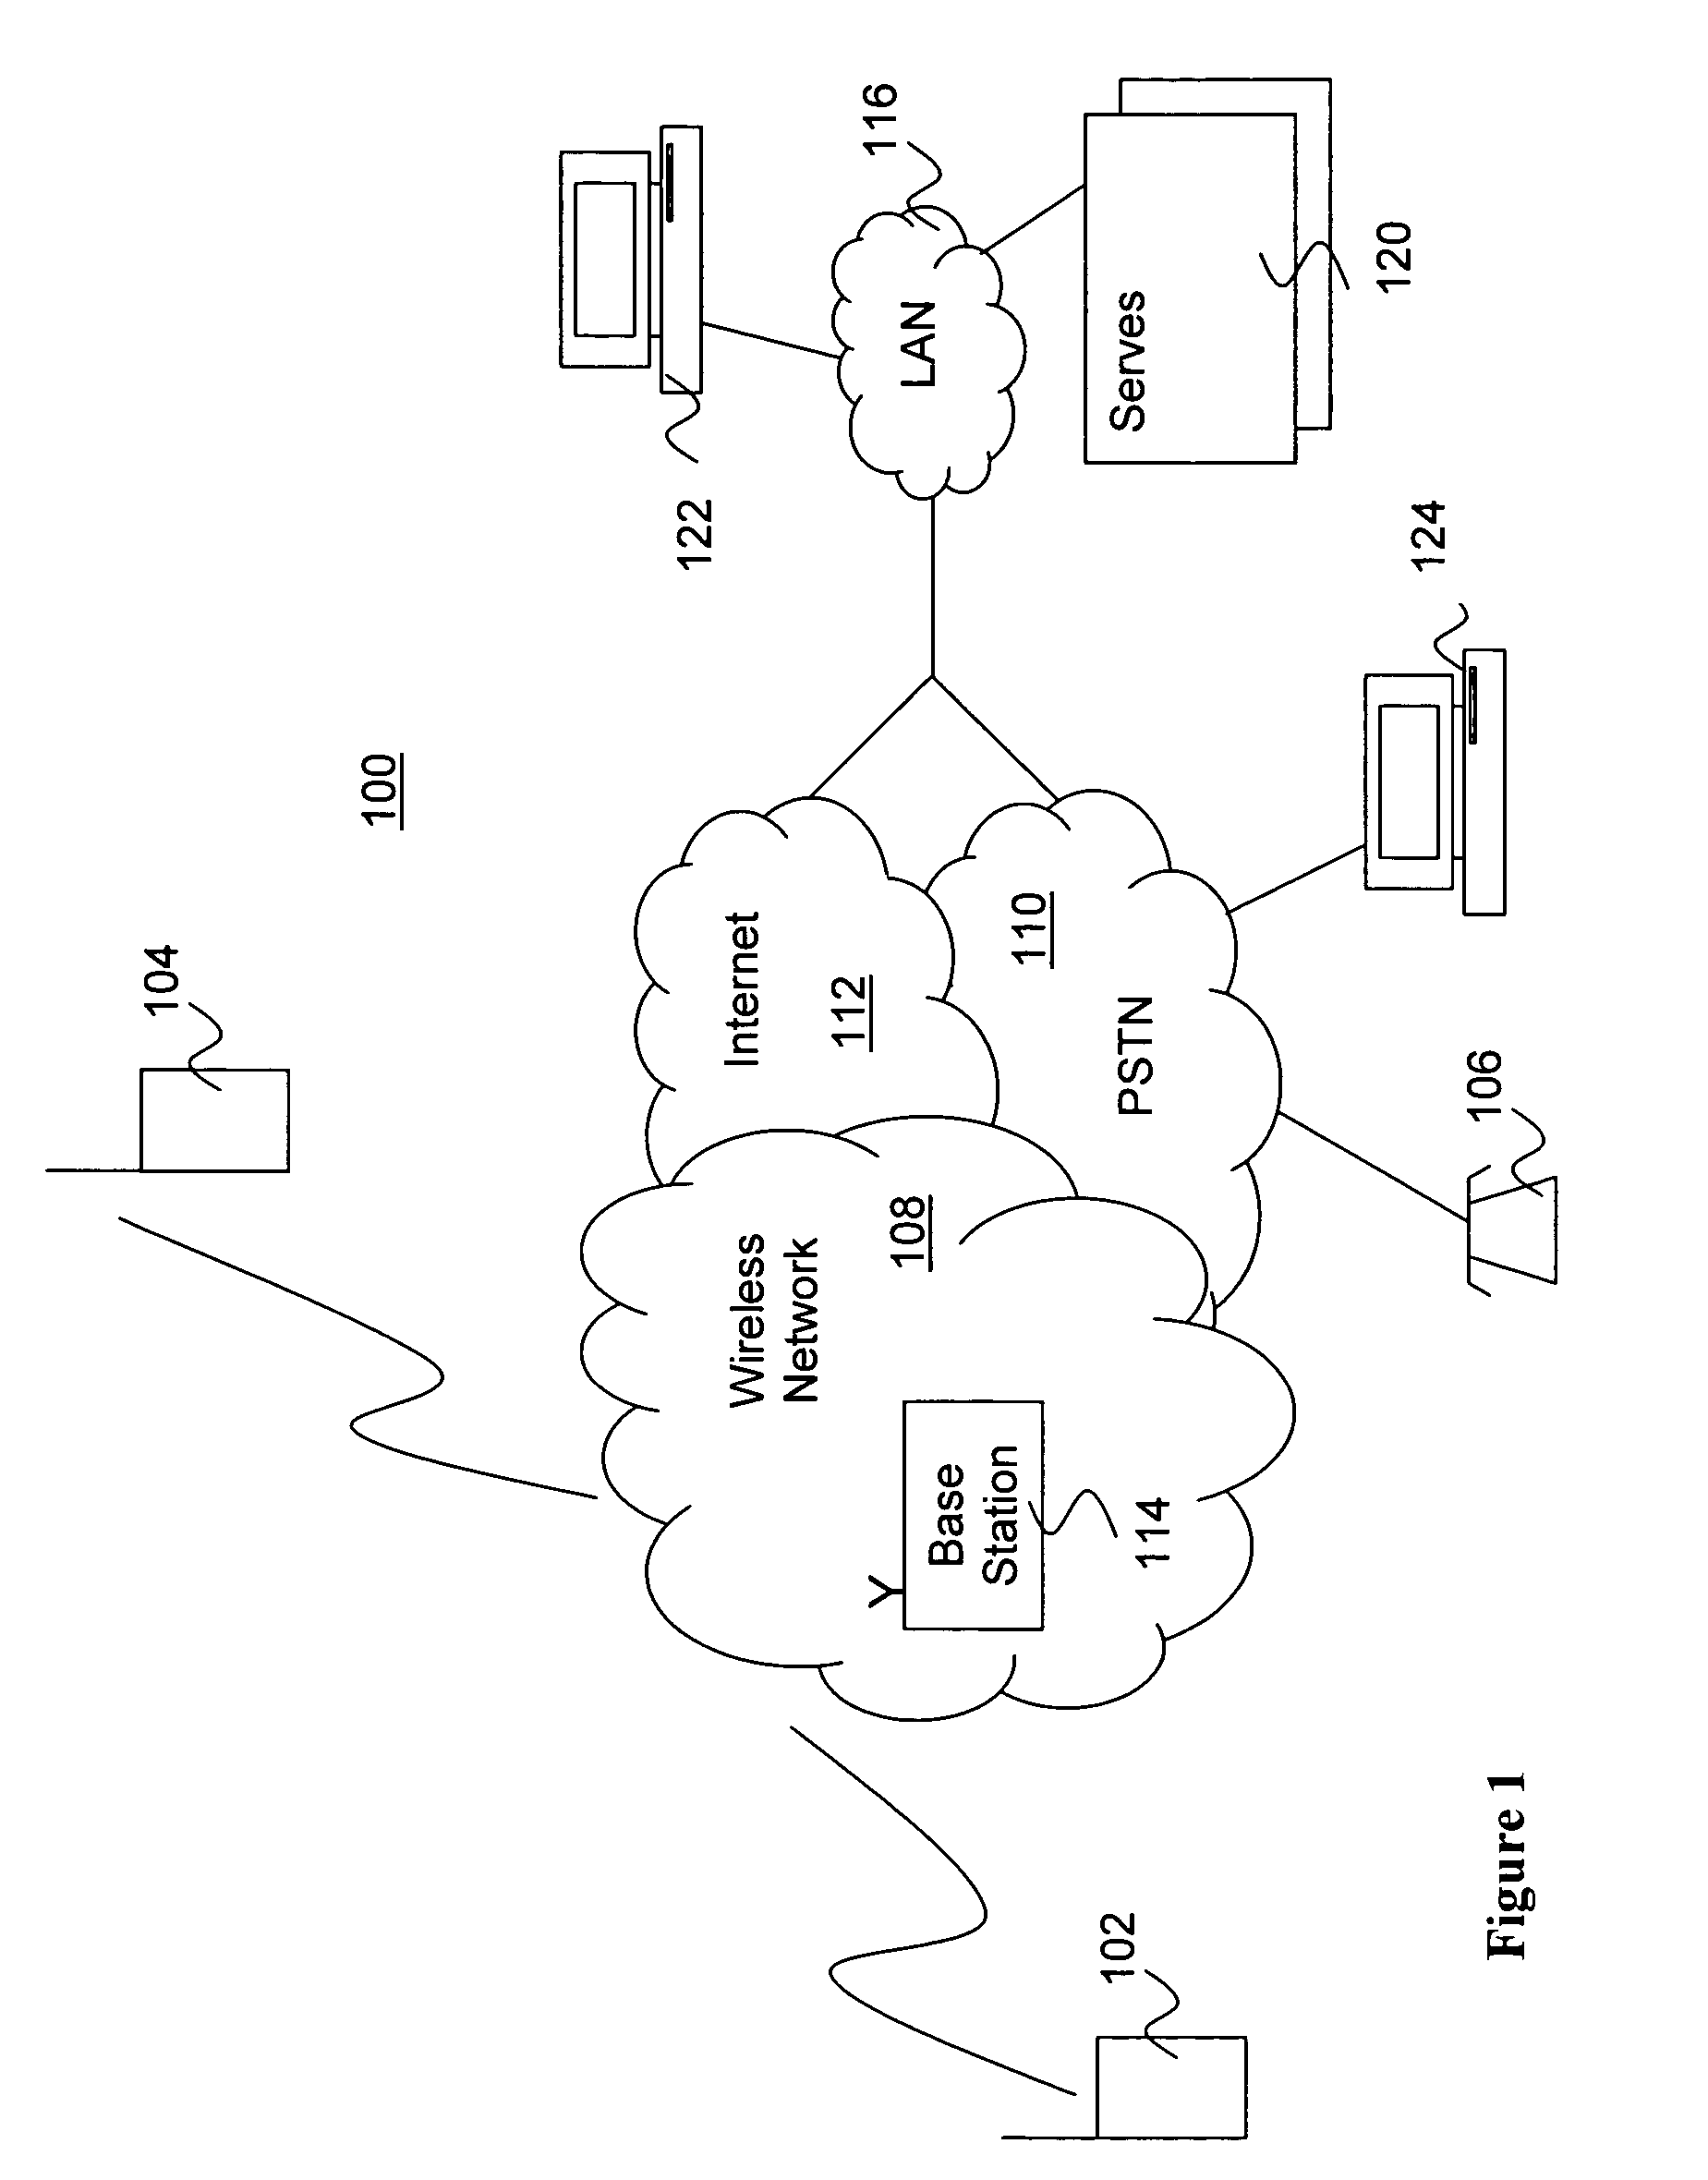 Unified message box for wireless mobile communication devices